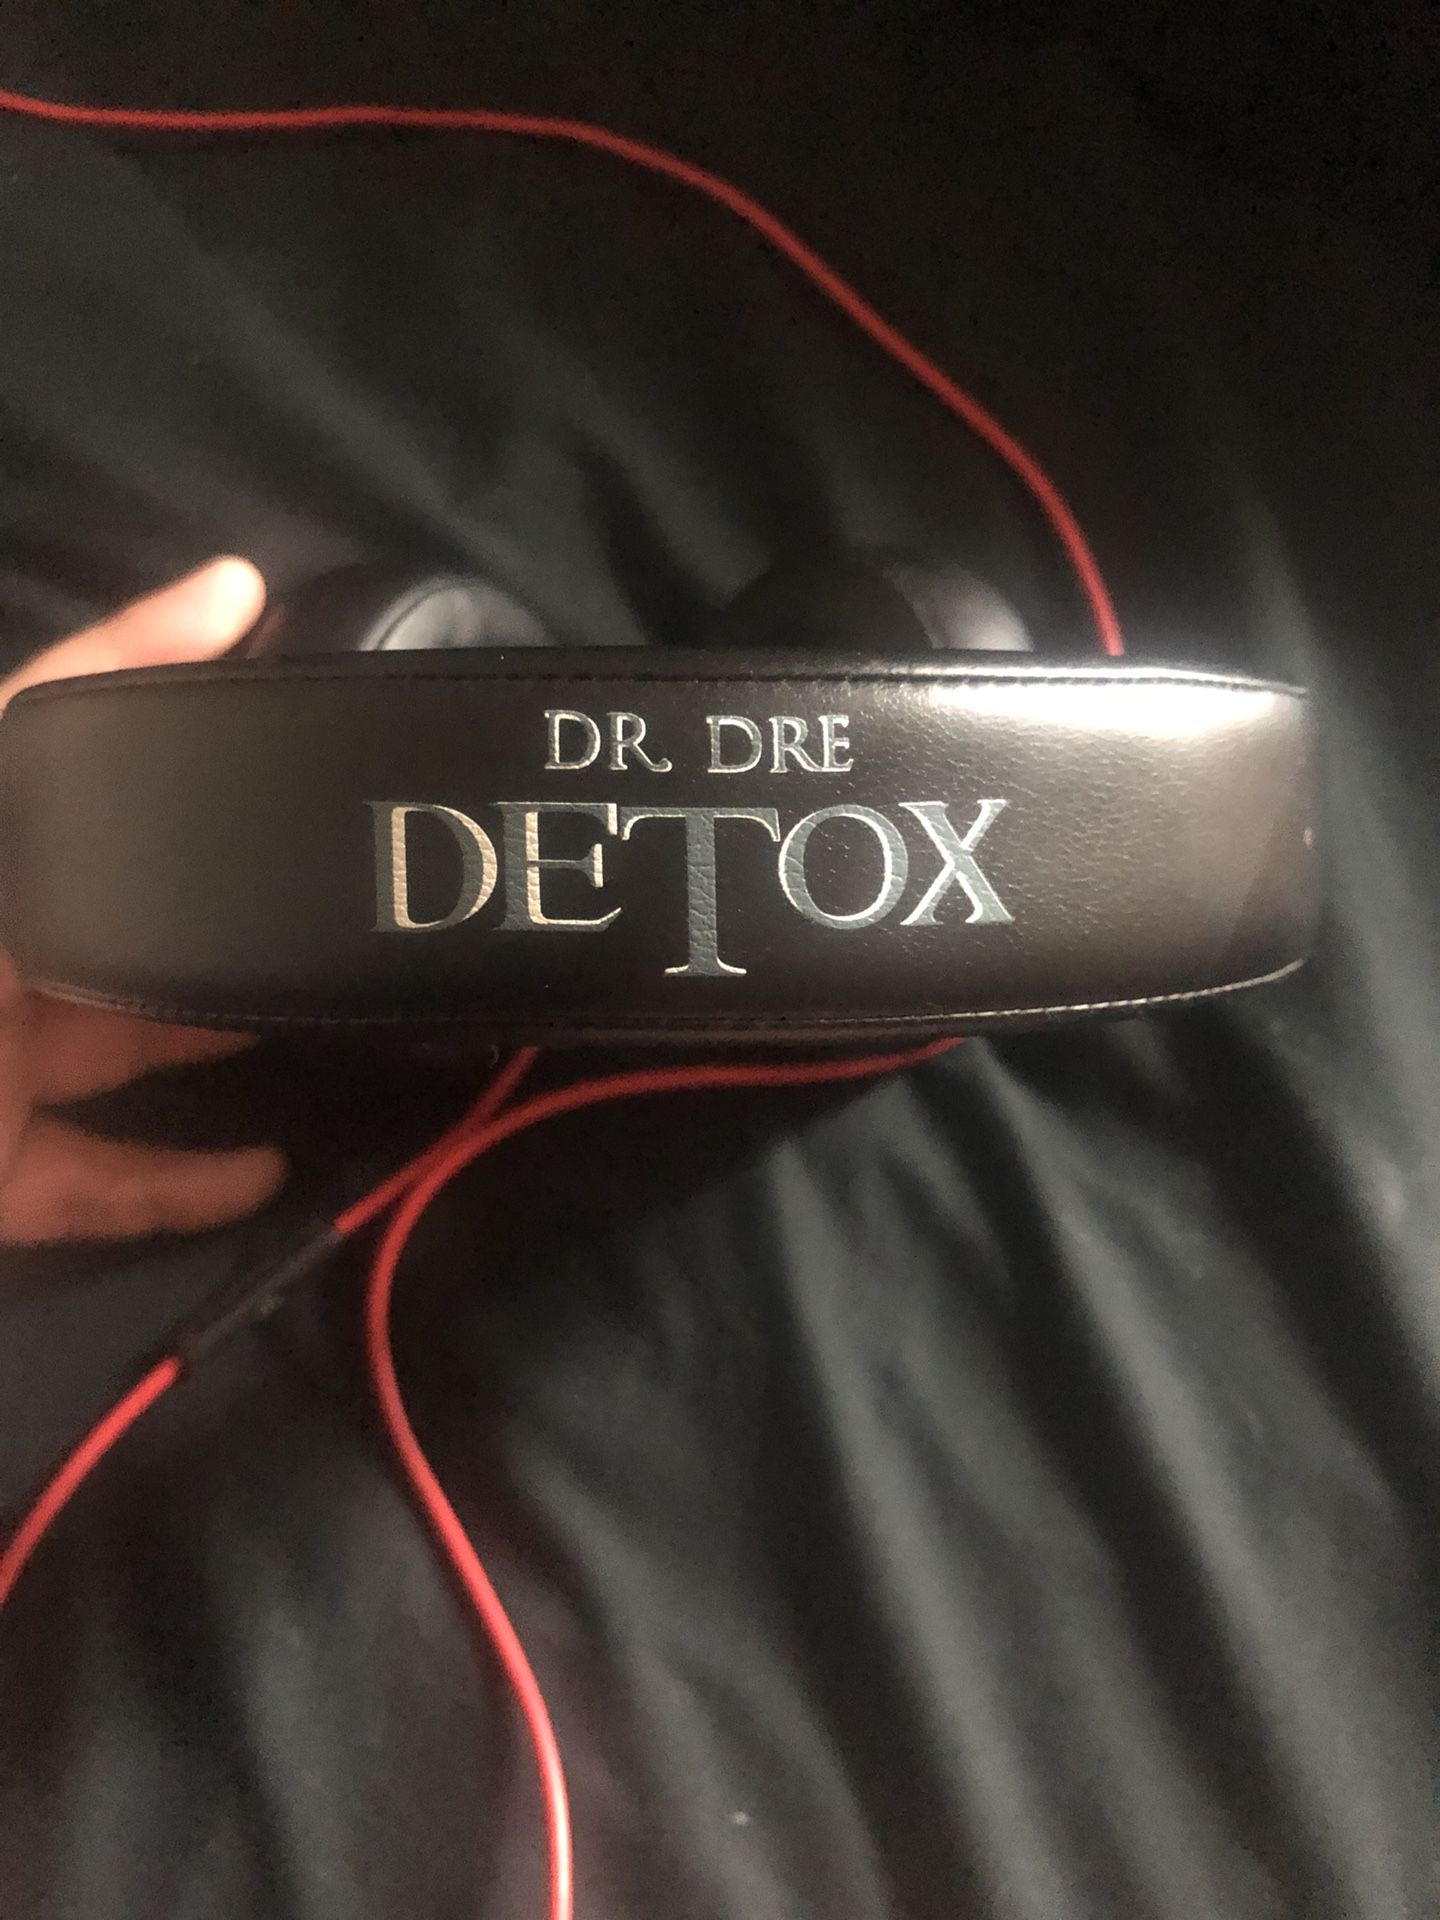 Limited edition Detox Beats by Dre